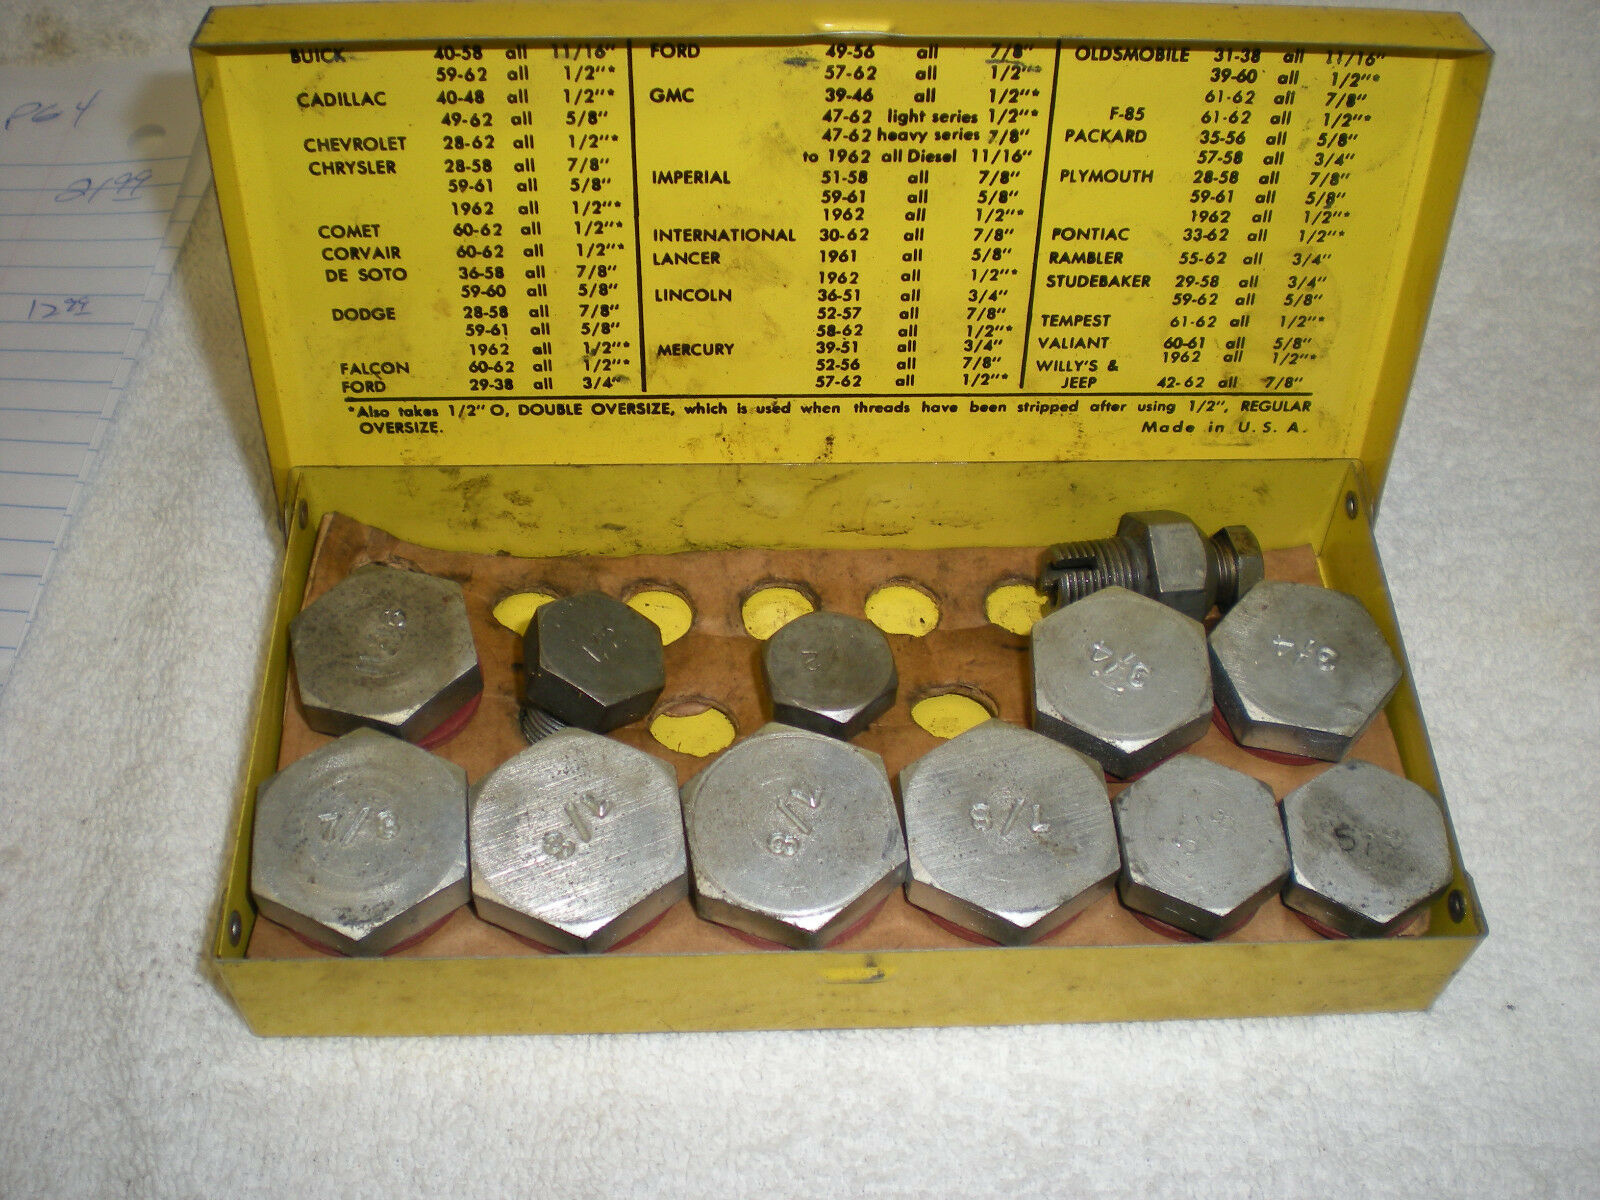 Vintage Drain Plug Assortment Kit 40 50 55 60 Packard Jeep Ford Chysler Imperial